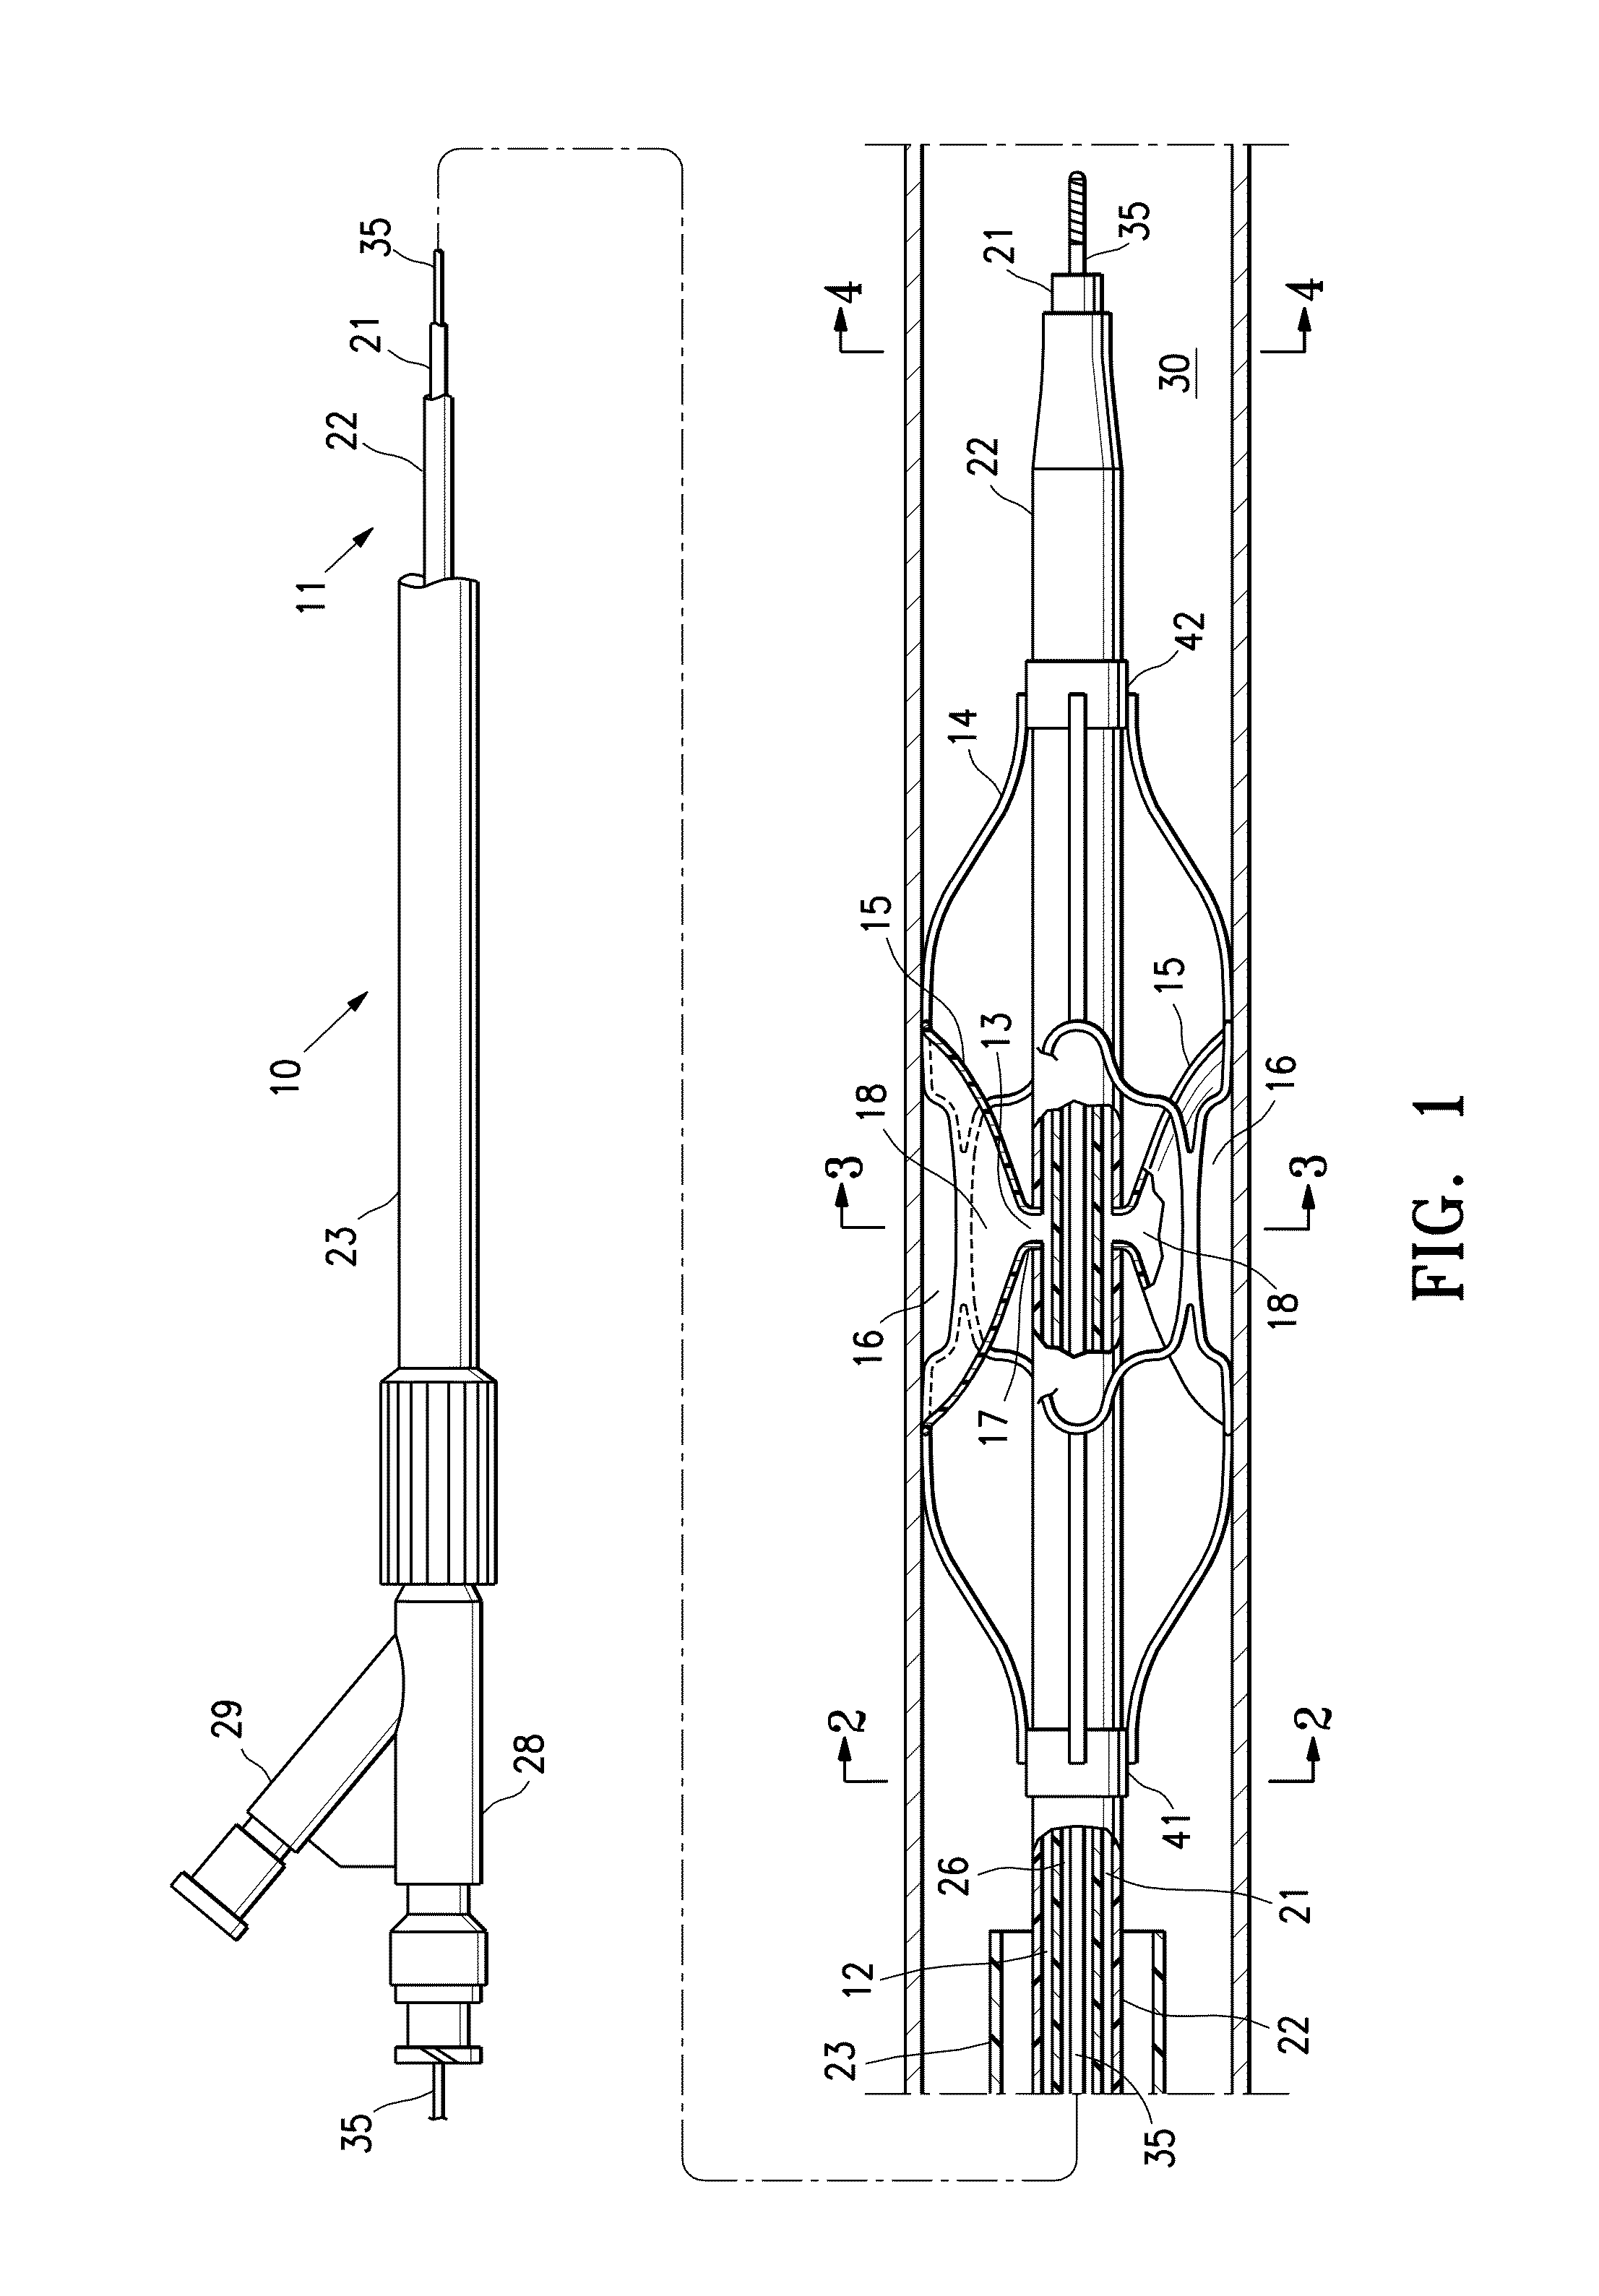 Low profile agent delivery perfusion catheter having a funnel shaped membrane